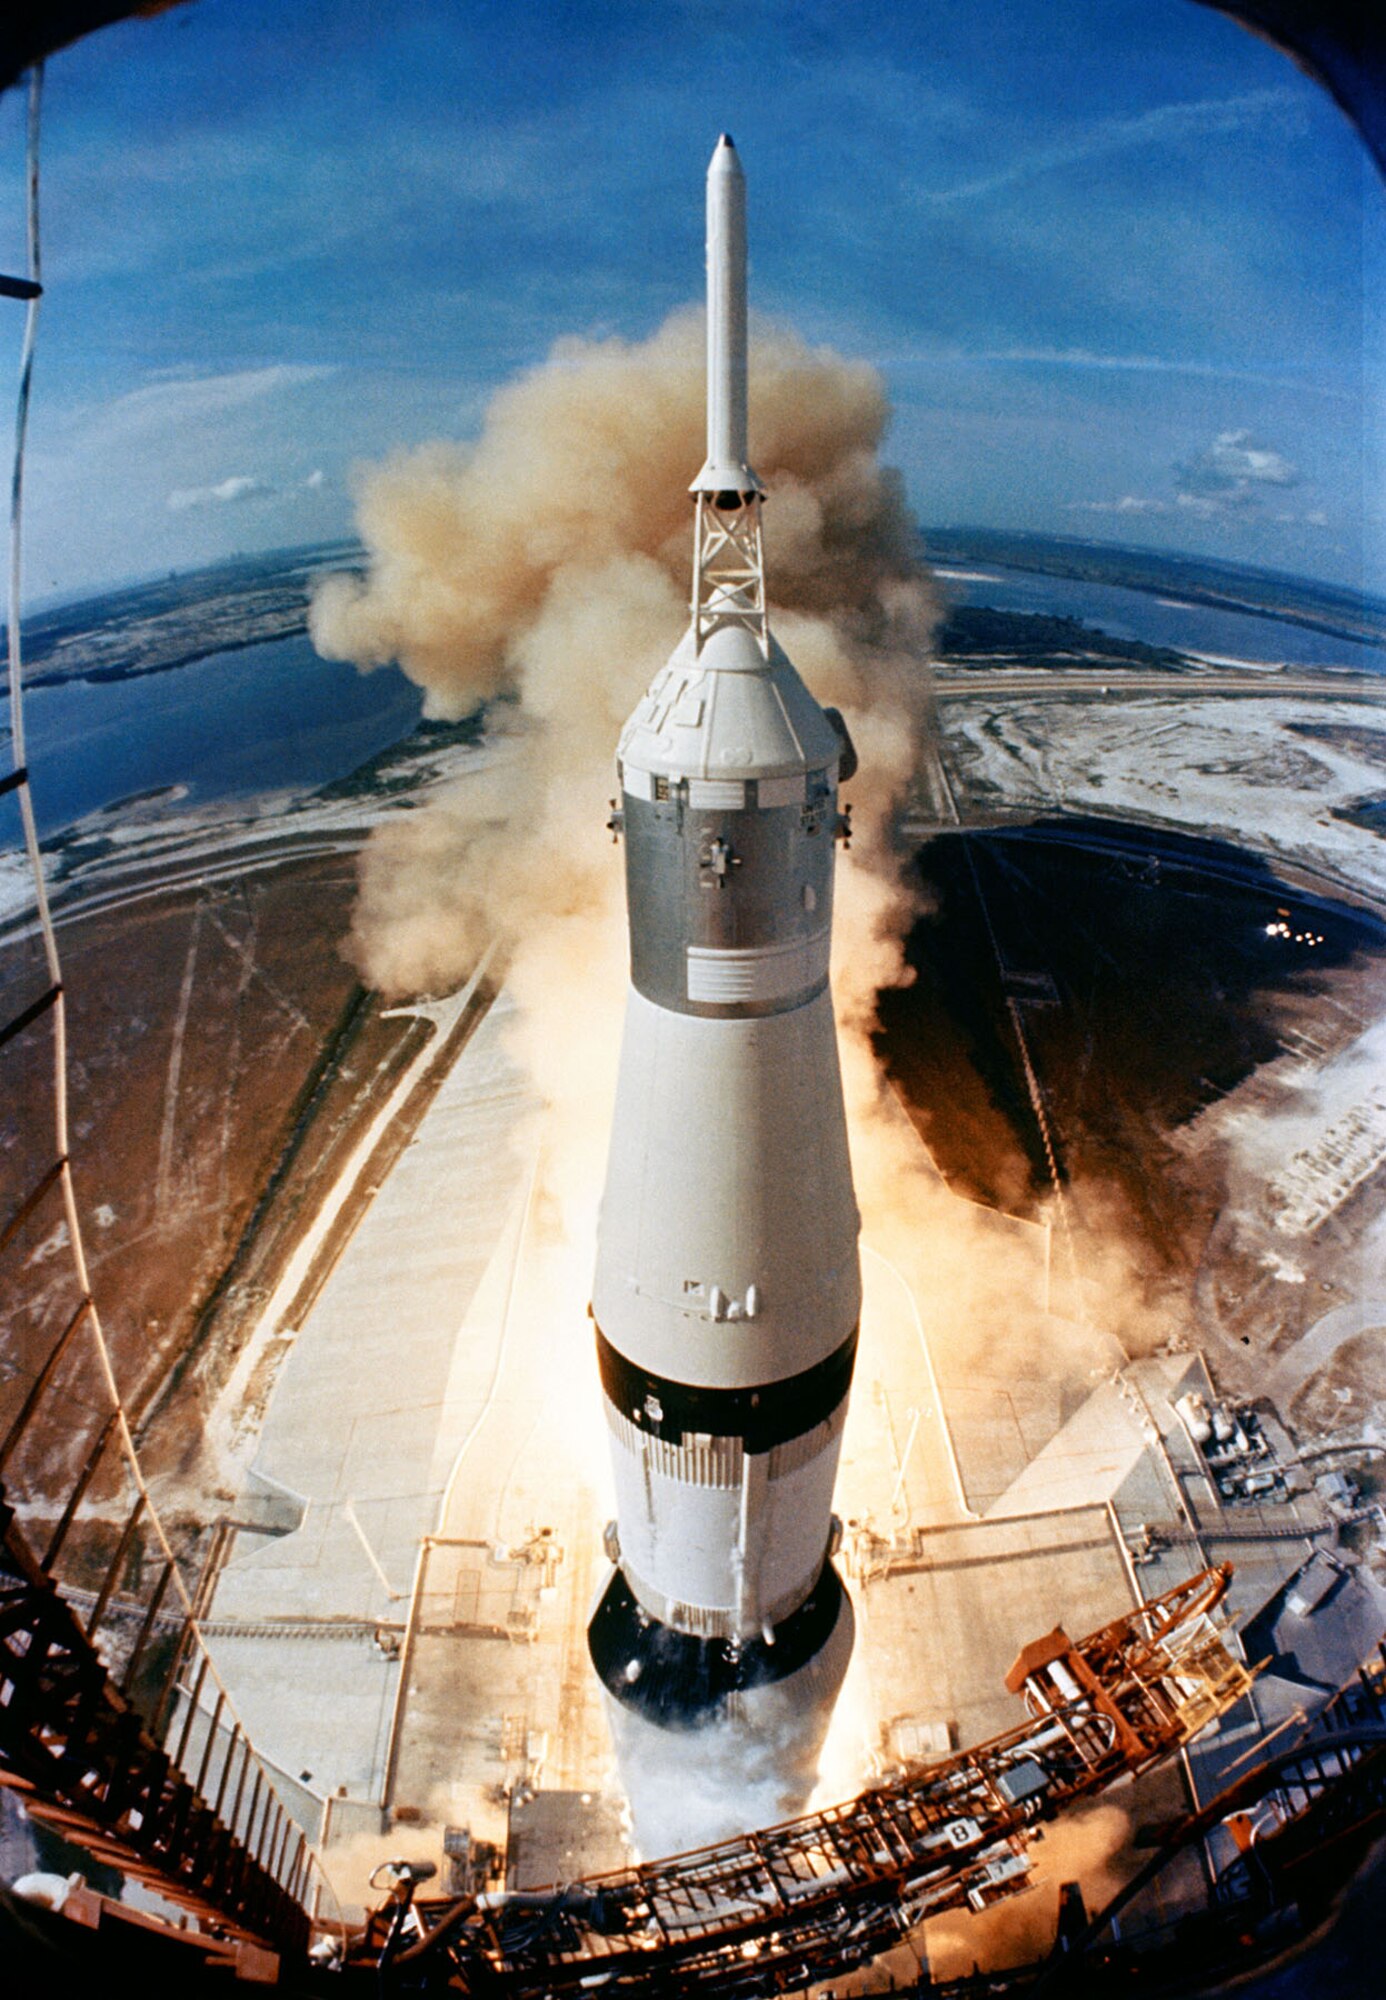 Smoke and flames signal the opening of a historic journey as the Saturn V clears the launch pad at the Kennedy Space Center on July 16, 1969. (NASA photo)